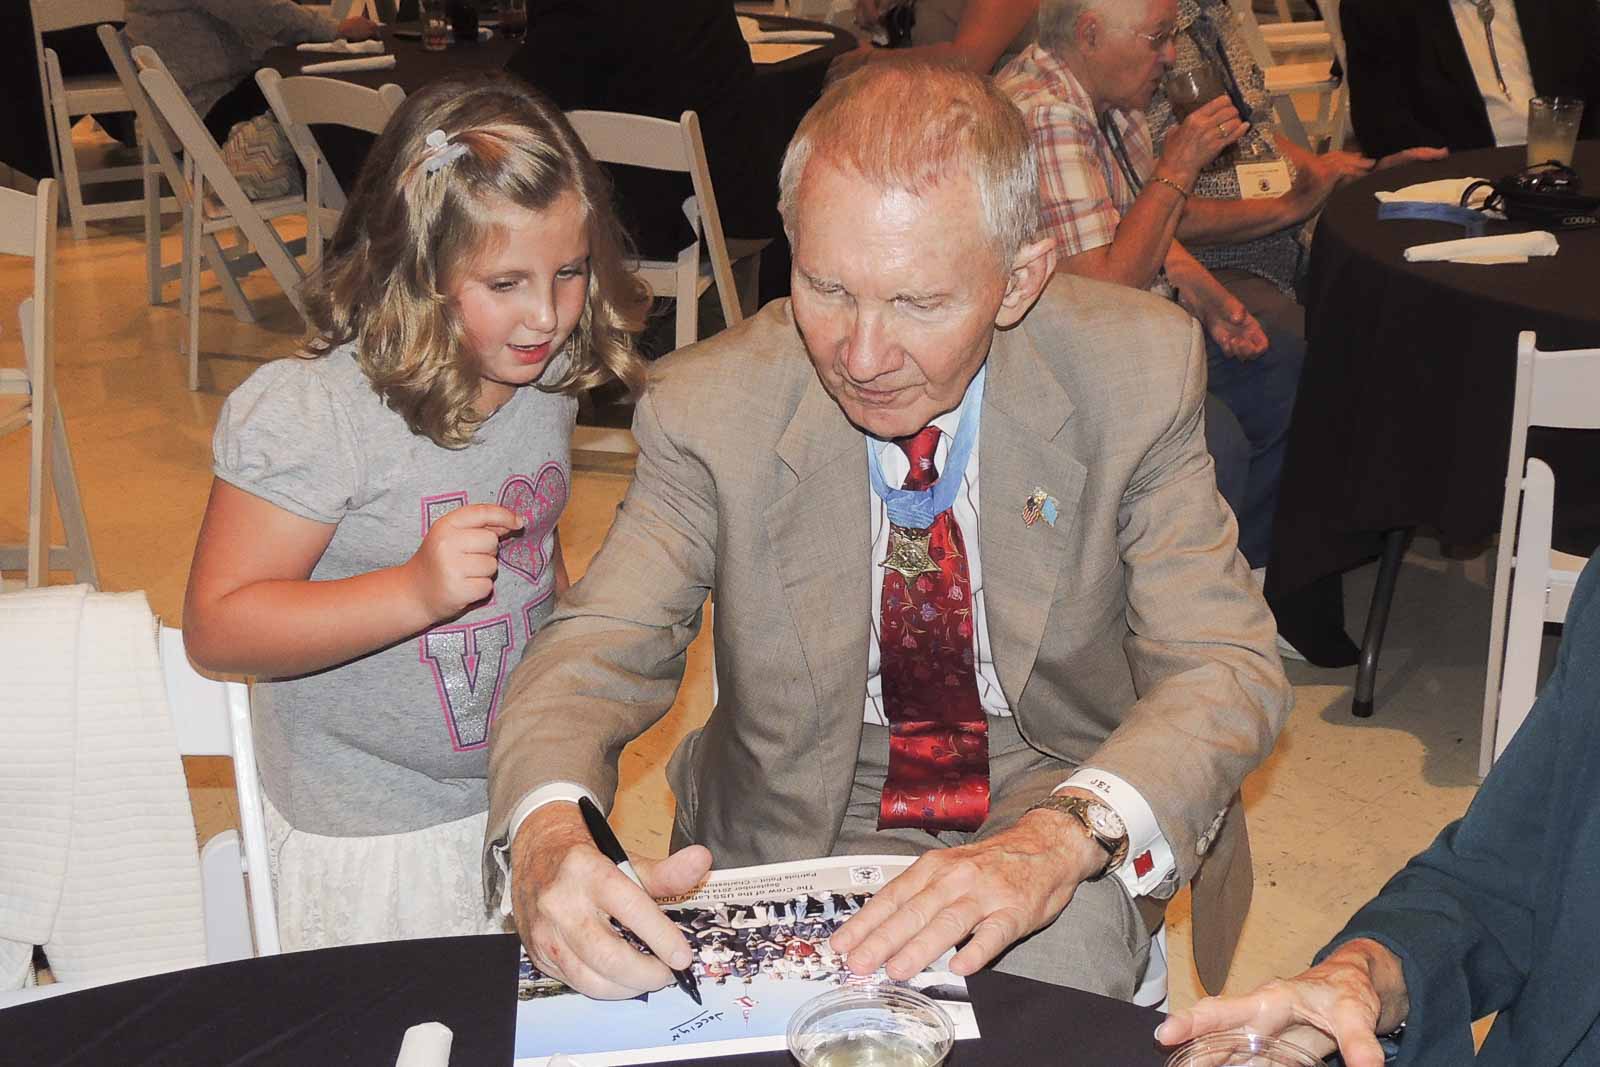 Celebrity Giving Autograph To Child - Patriots Point Foundation